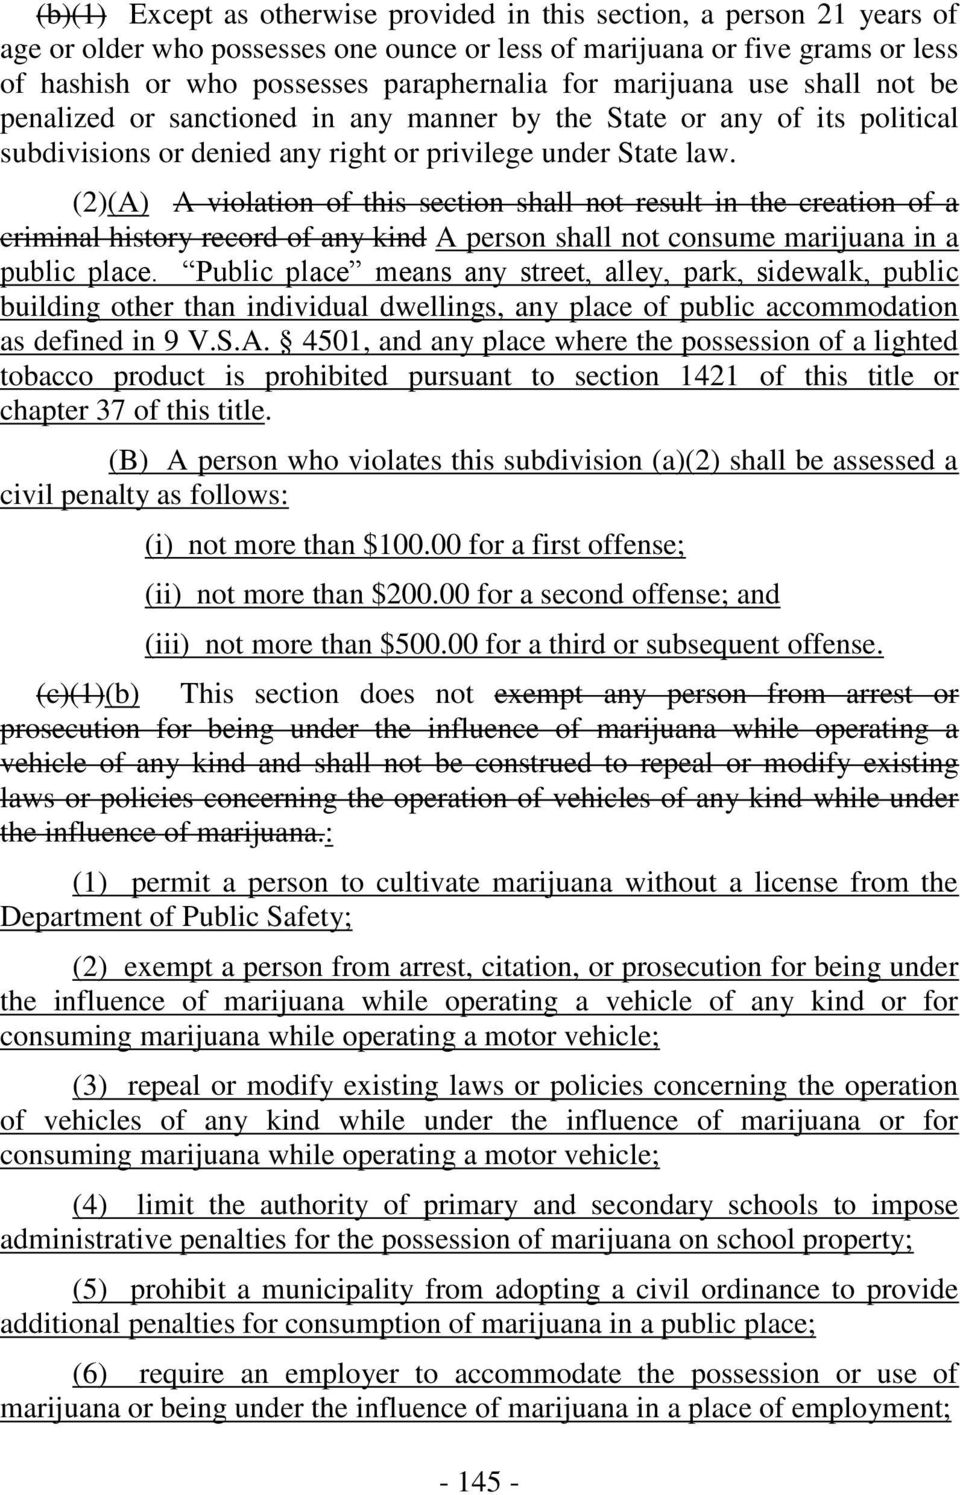 (2)(A) A violation of this section shall not result in the creation of a criminal history record of any kind A person shall not consume marijuana in a public place.